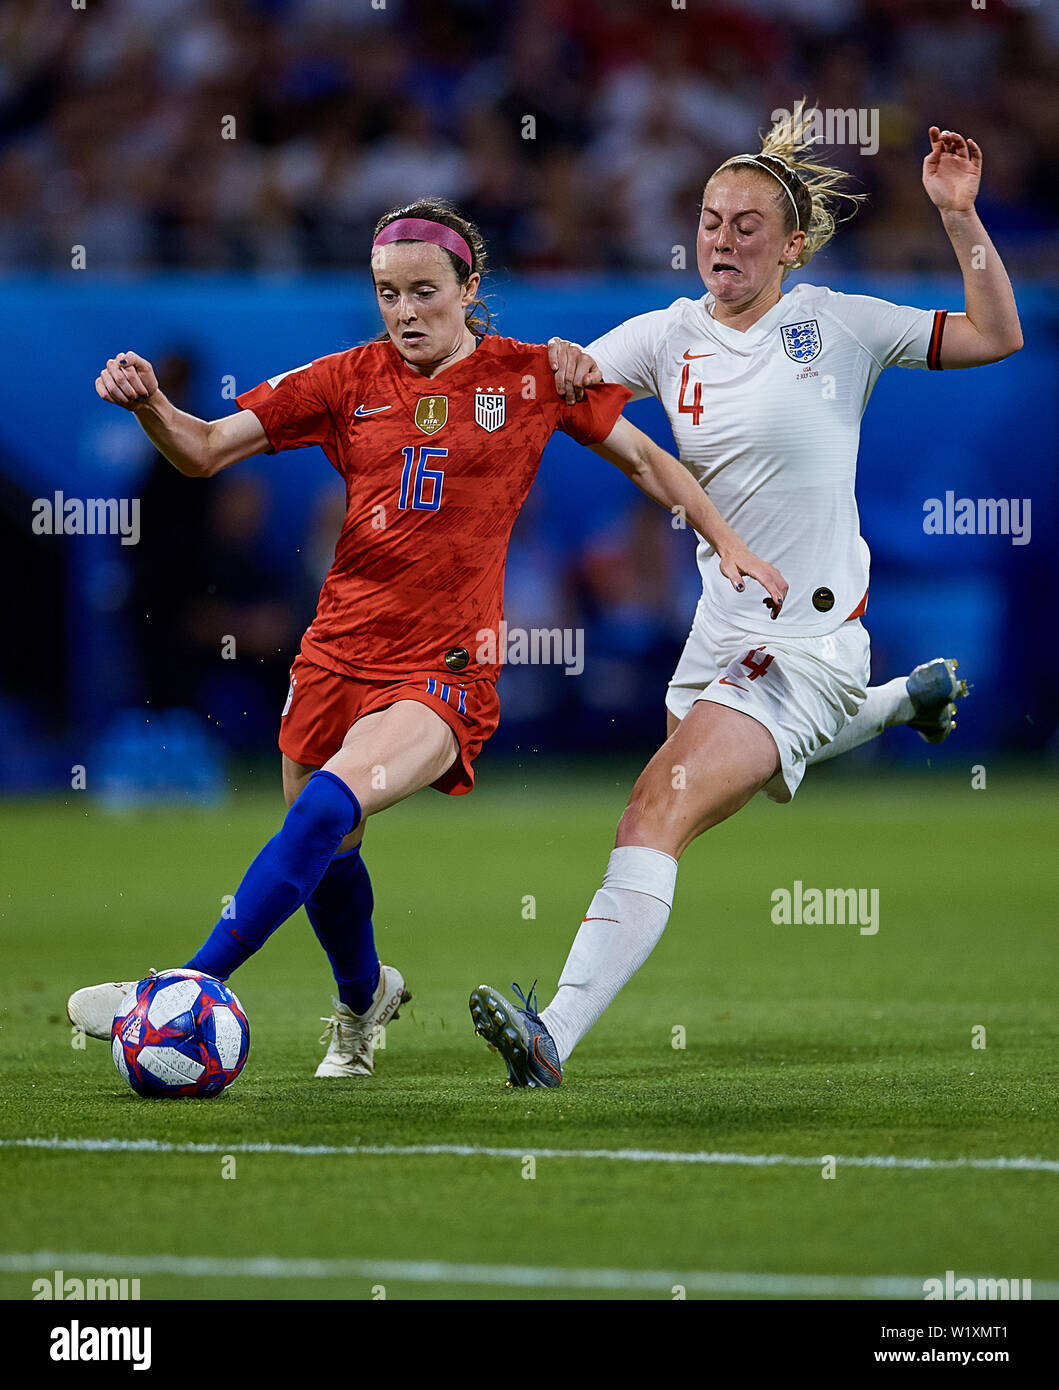 LYON, FRANCE - JULY 02: Rose Lavelle of the USA and Keira Walsh of England competes for the ball during the 2019 FIFA Women's World Cup France Semi Final match between England and USA at Stade de Lyon on July 2, 2019 in Lyon, France. (Photo by David Aliaga/MB Media) Stock Photo